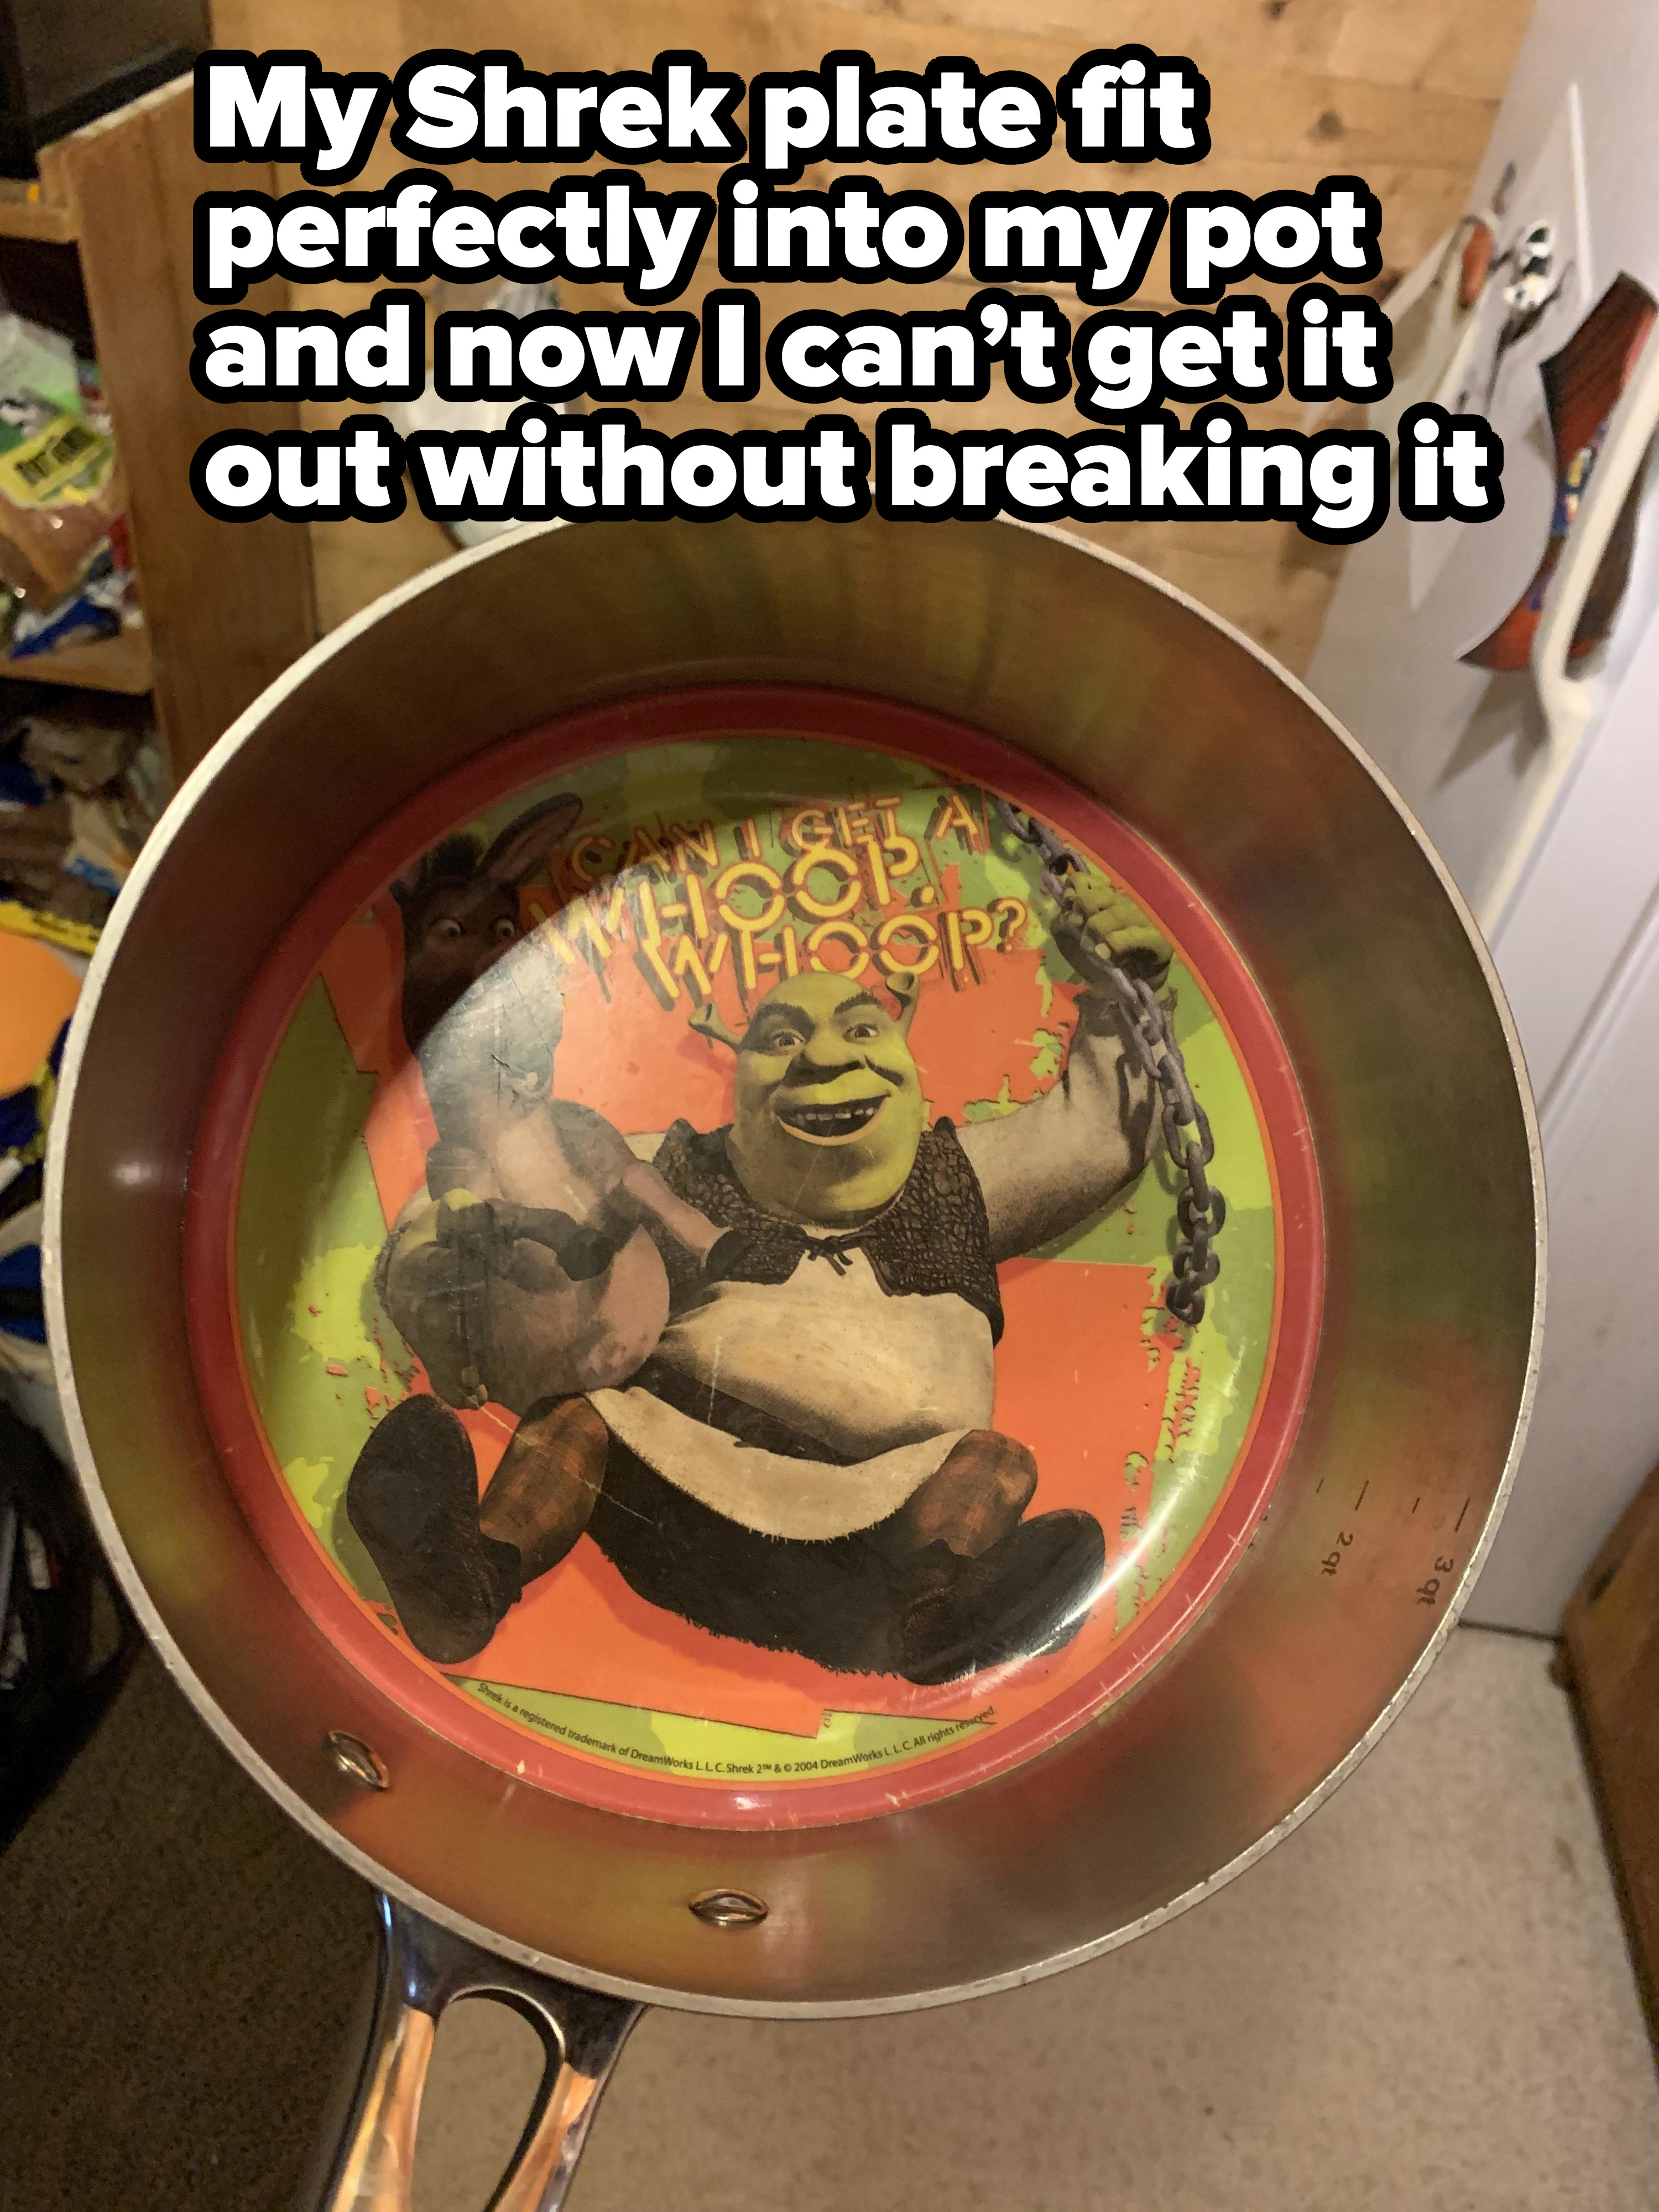 A Shrek plate, perfectly affixed into the bottom of a pan, that can&#x27;t be removed without breaking it